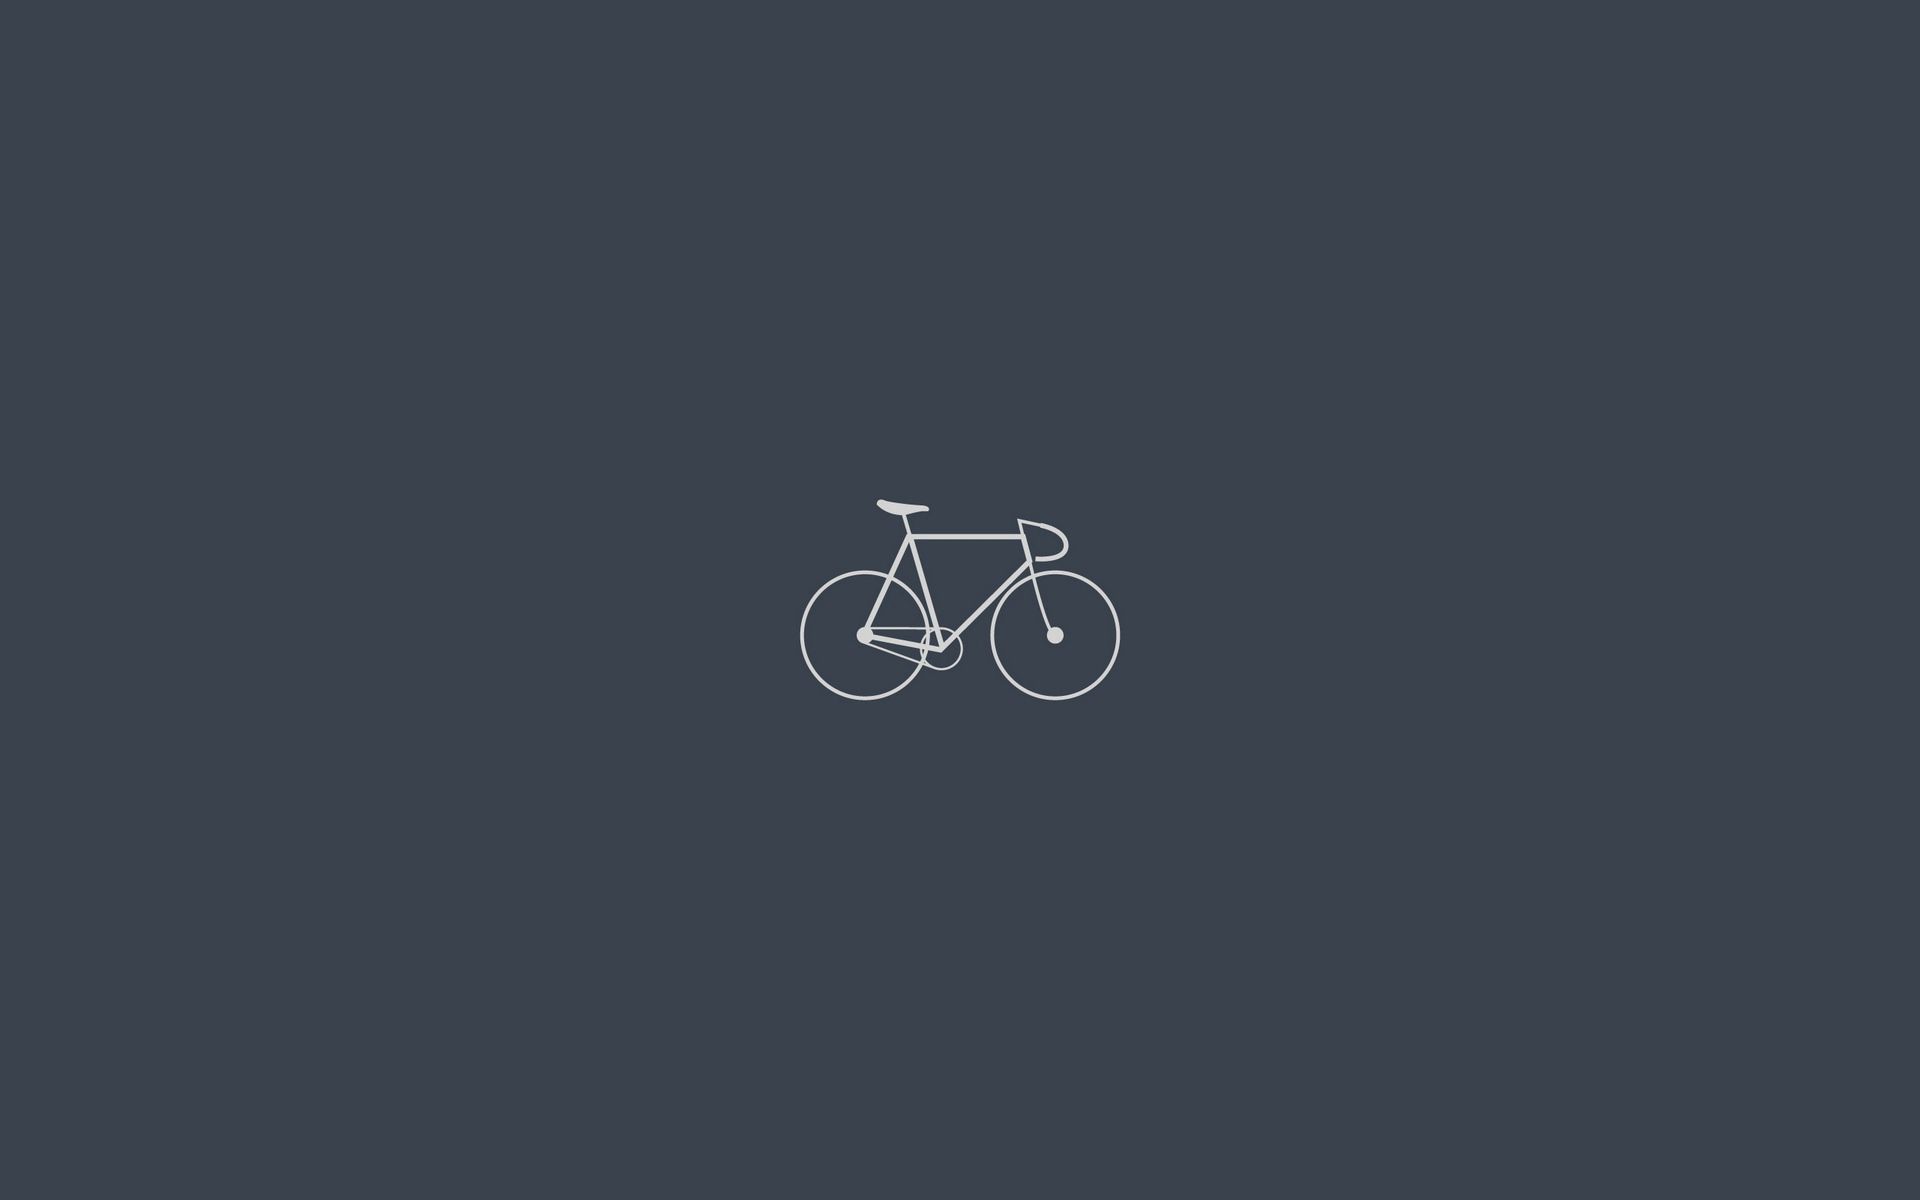 128619 download wallpaper bicycle, grey, minimalism screensavers and pictures for free